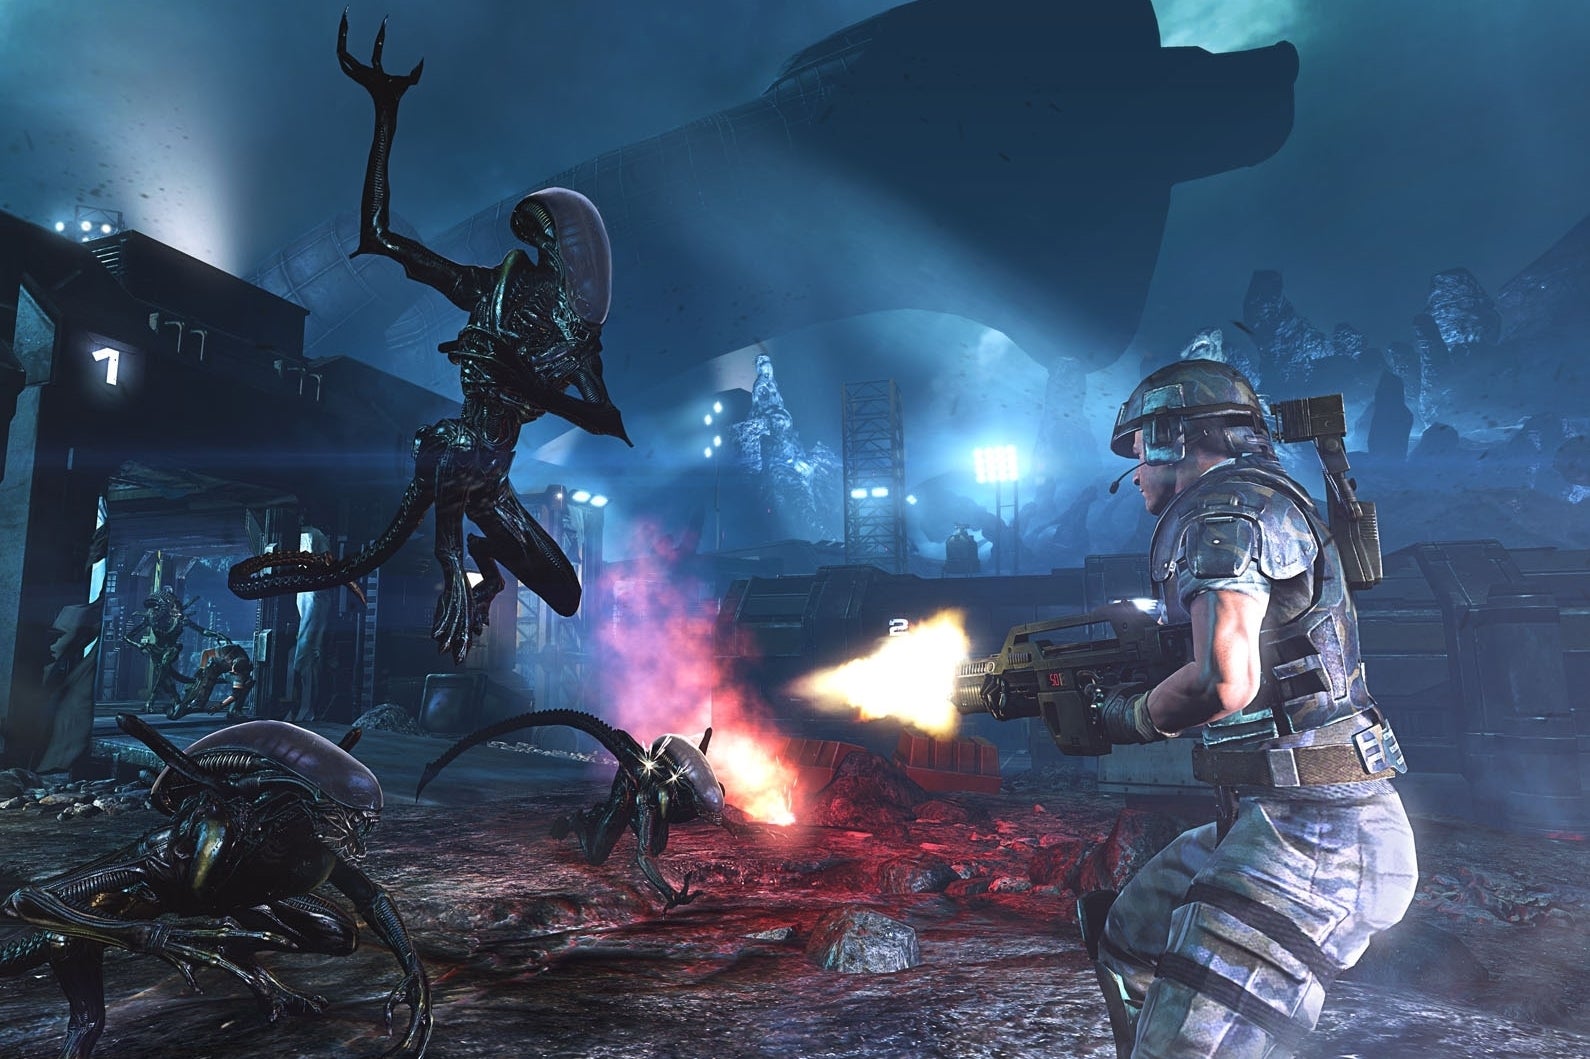 Image for Aliens: Colonial Marines' demo looked much prettier than the final game